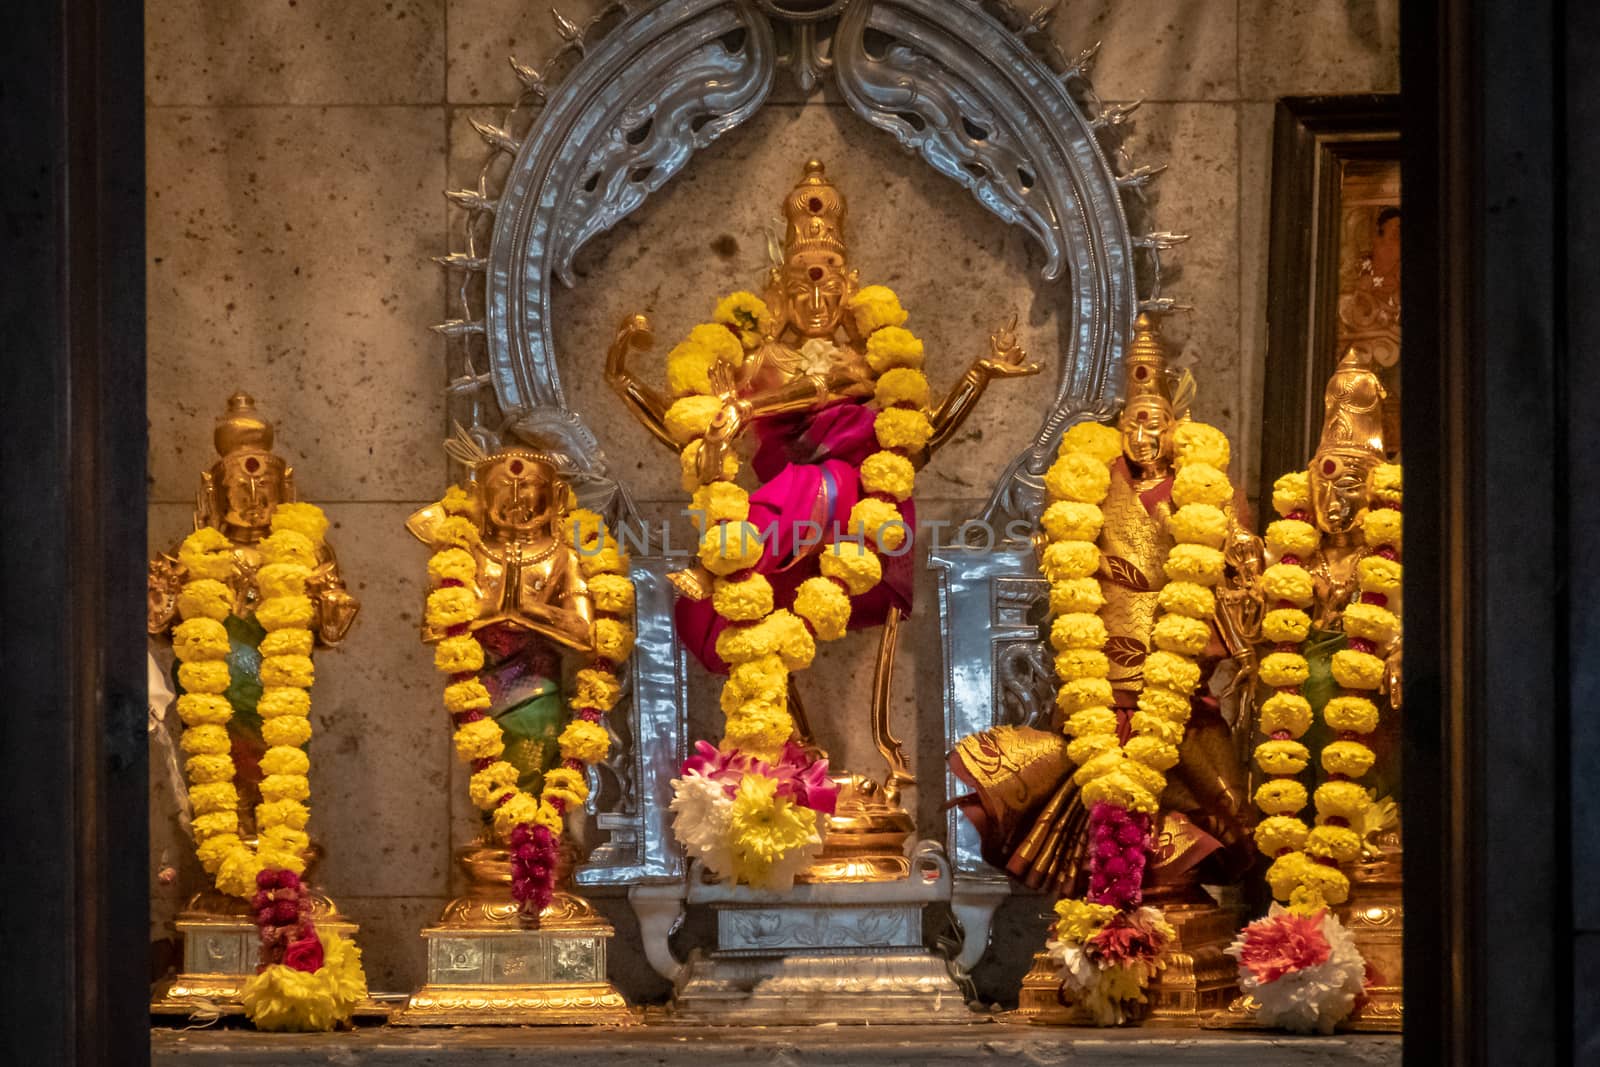 Sri Mahamariamman Temple golden statues in most holy room of Hindu temple in Kuala Lumpur by MXW_Stock